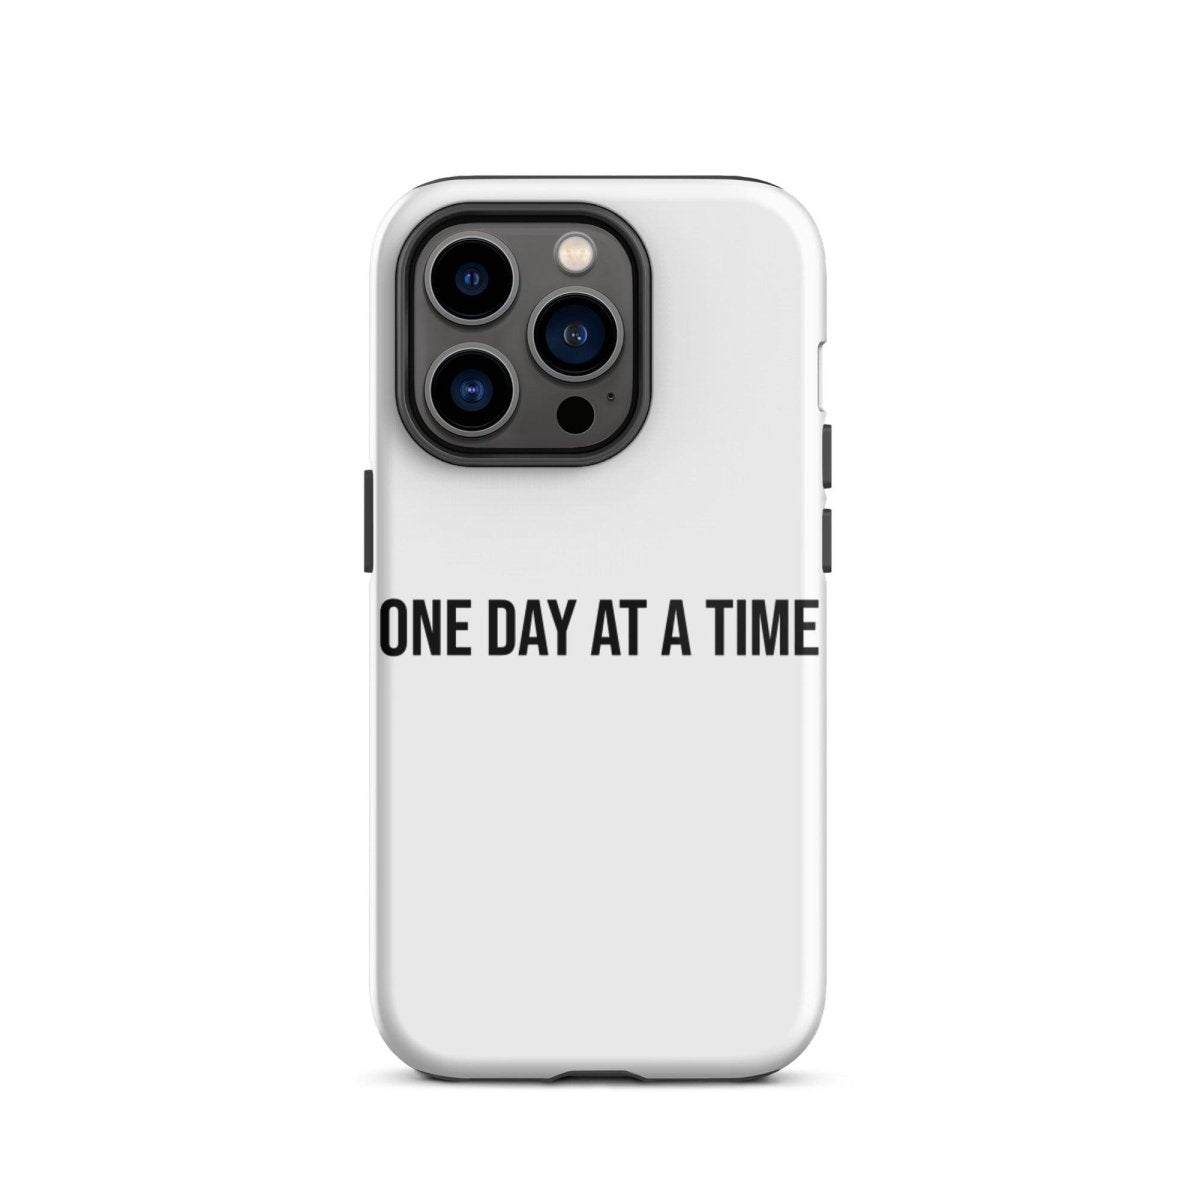 Tough iPhone case "One day at a time" - Clean & Sober